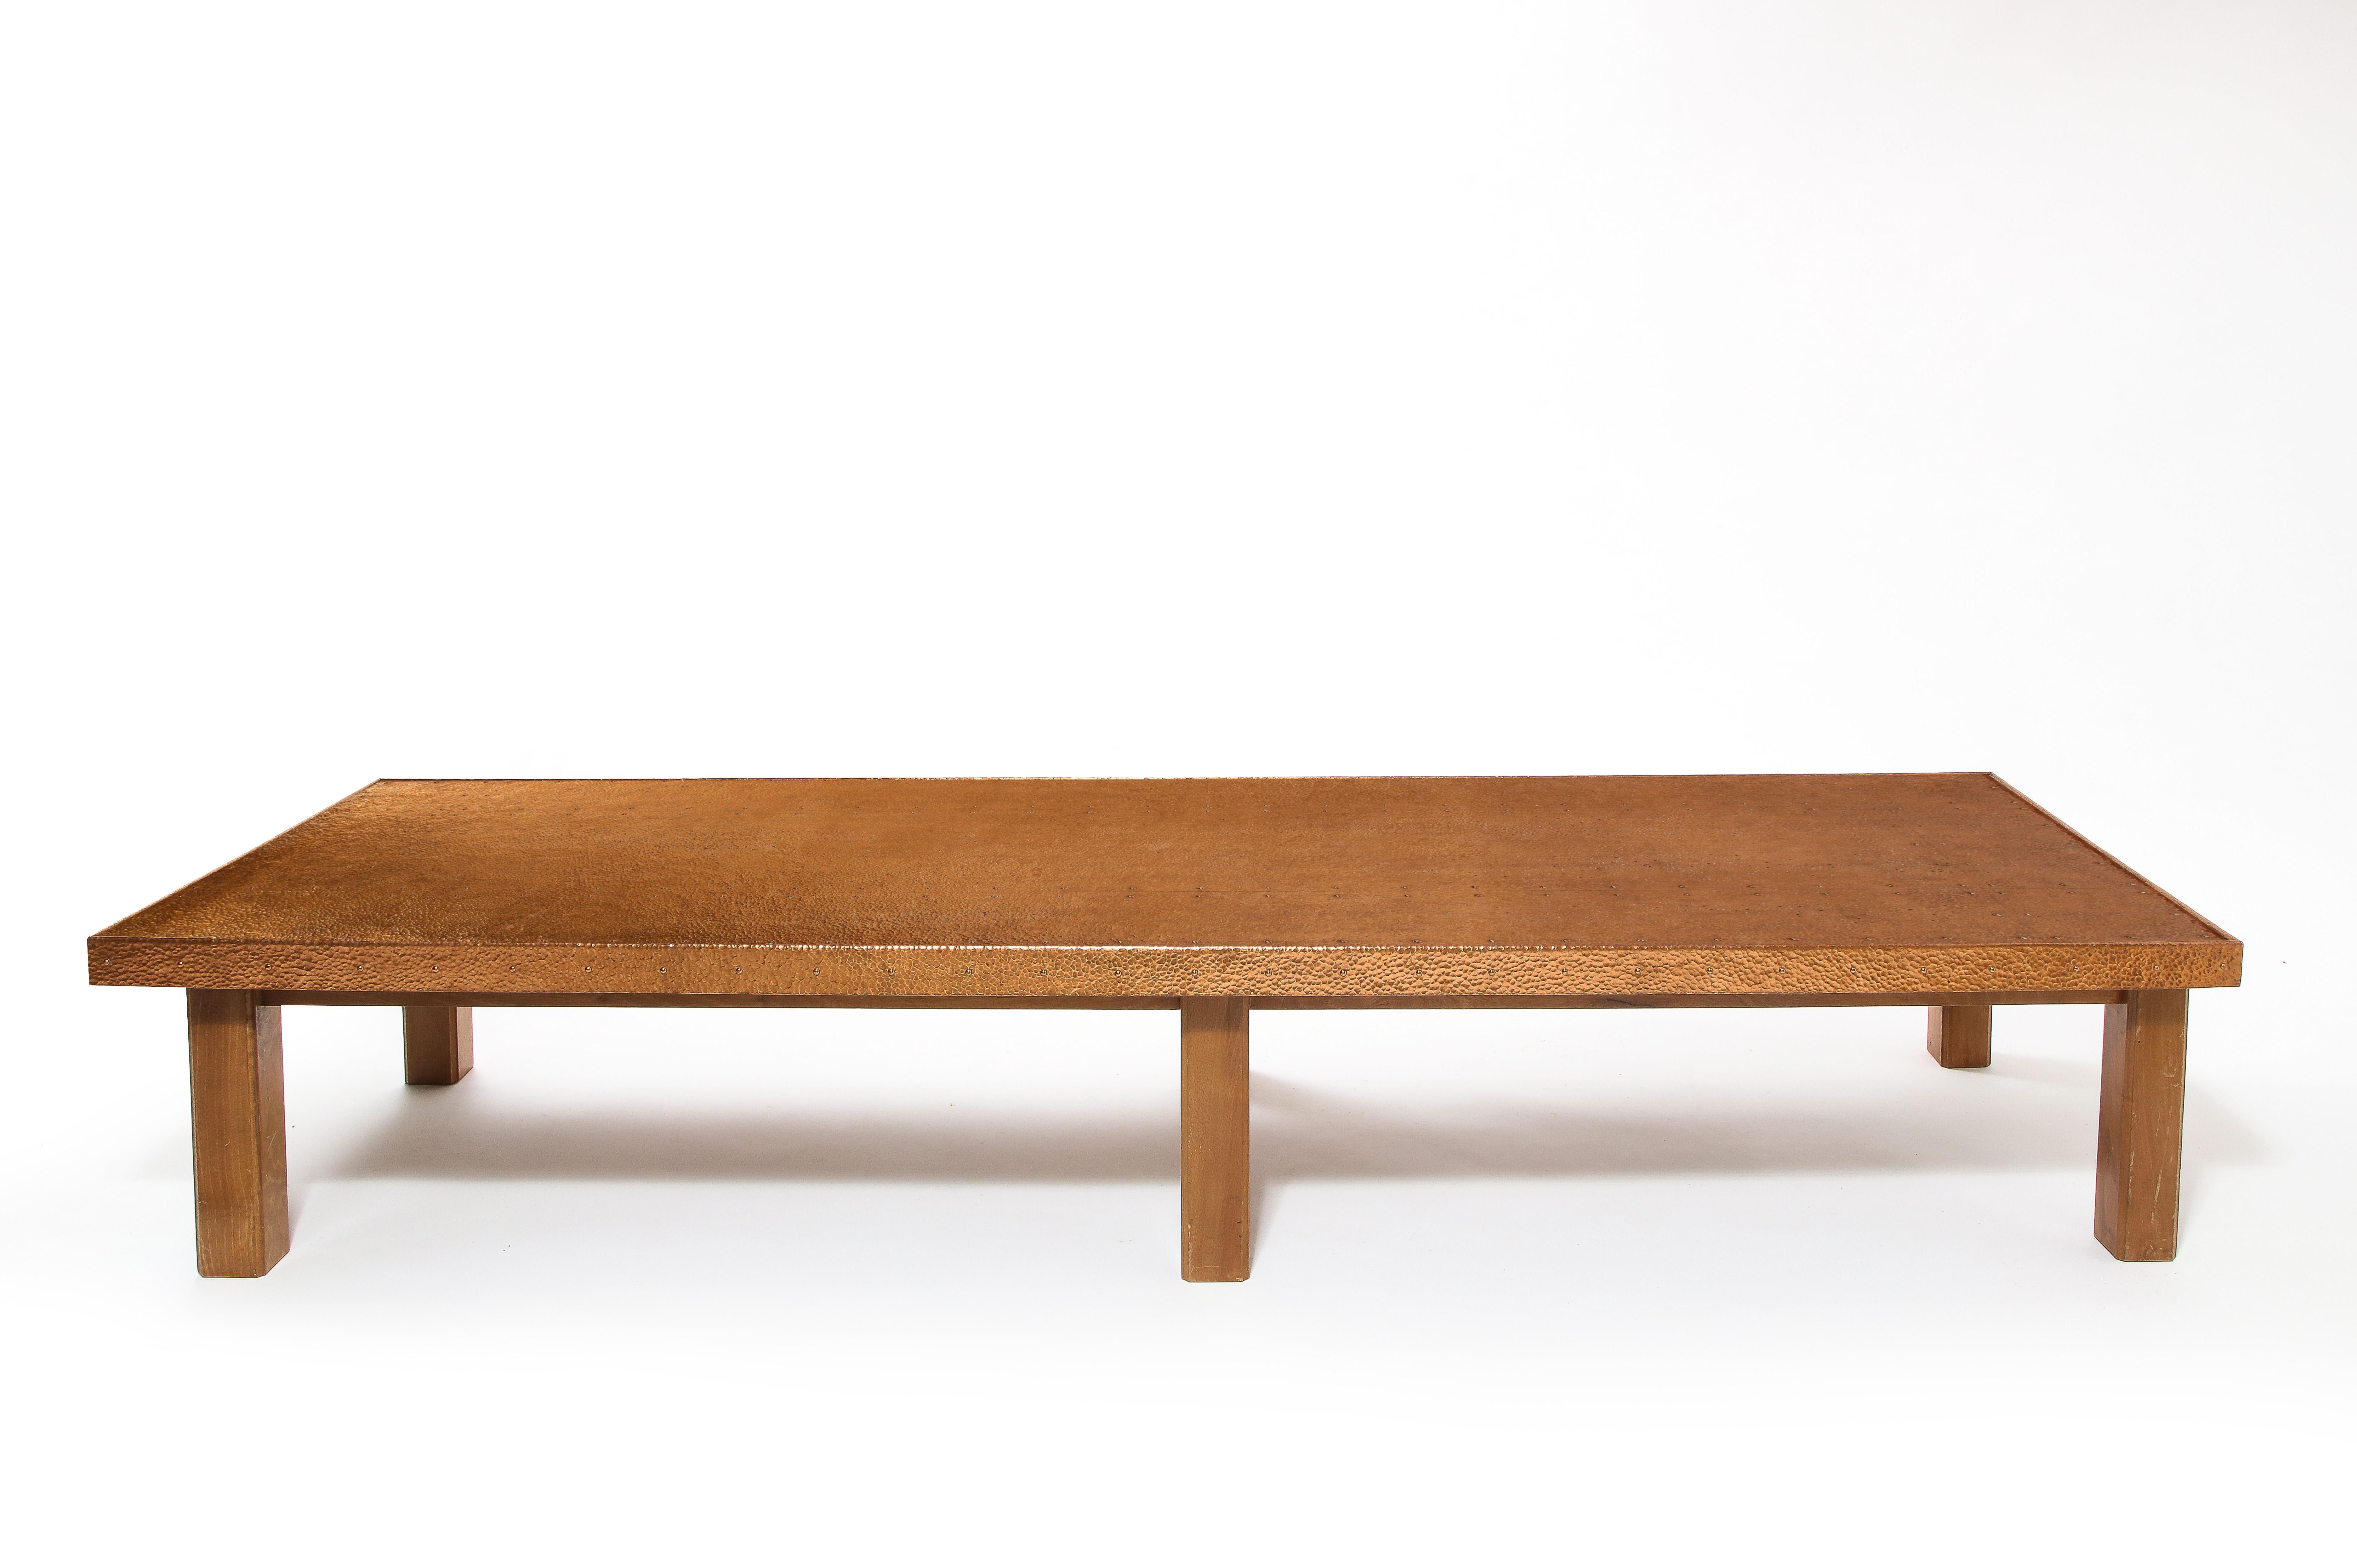 A large coffee table in elm with a solid copper top it made of a thick bent sheet of copper and is ballpoint hammered throughout.